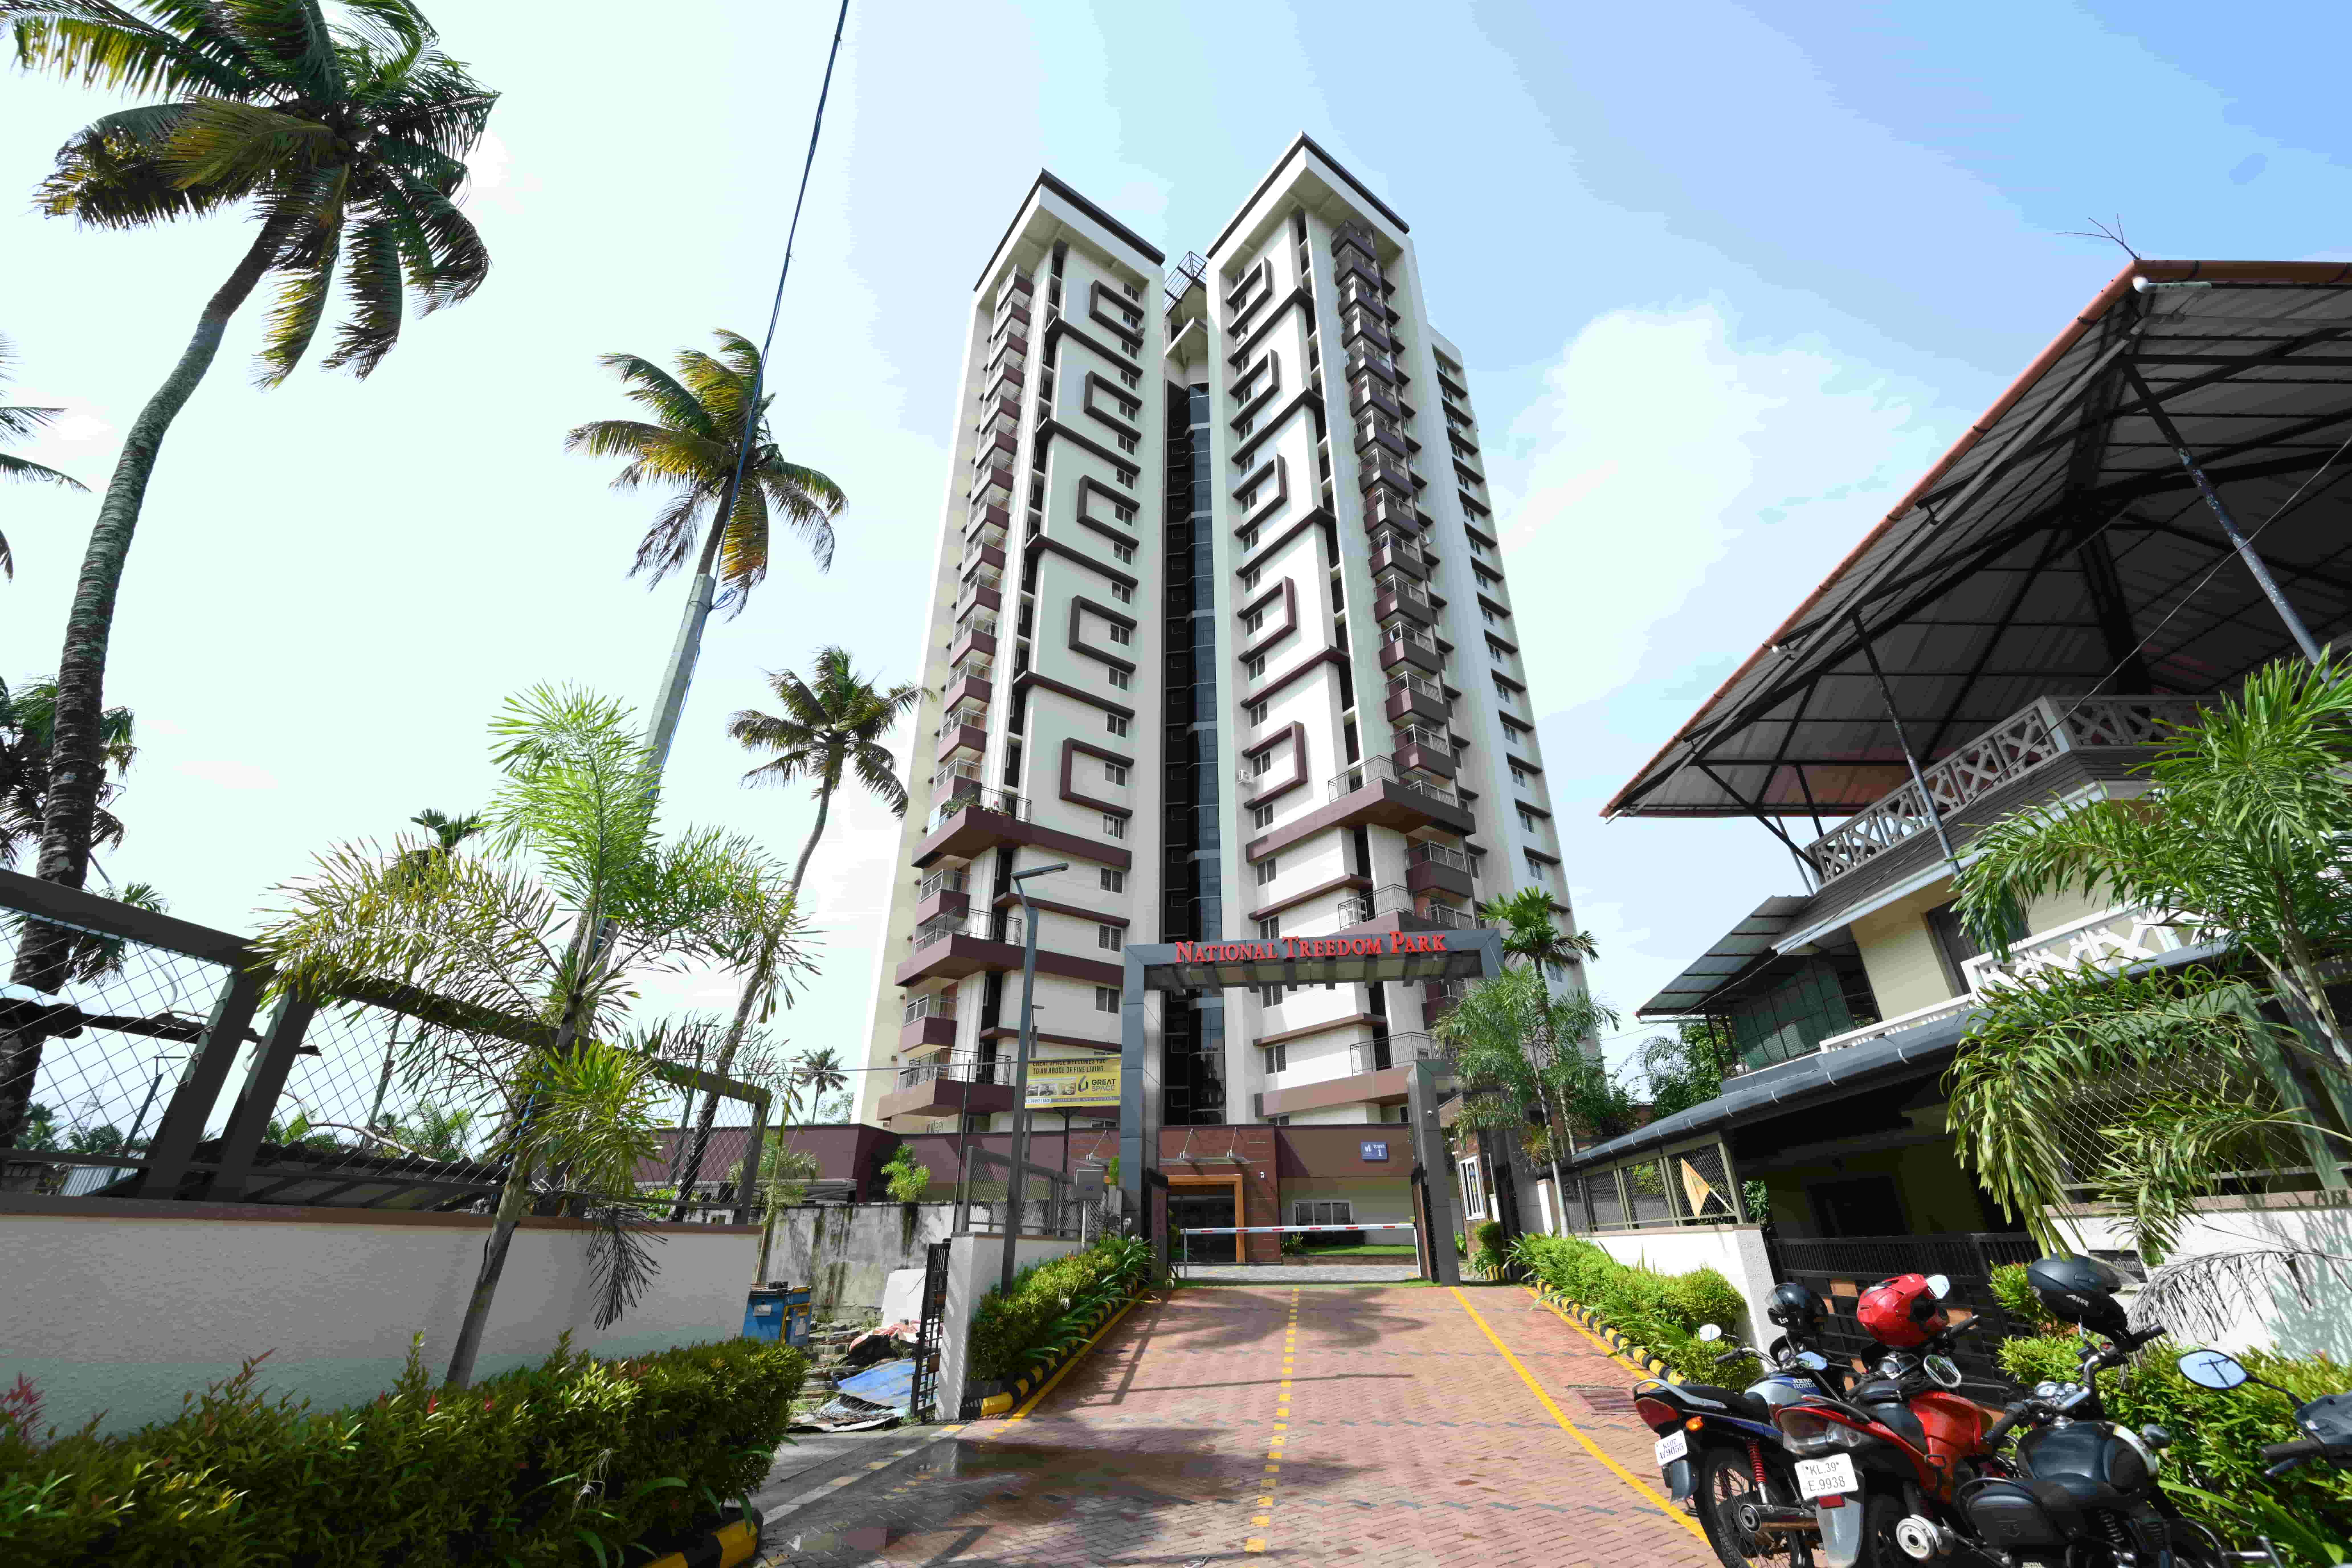 Affordable ready to move in flats in Kochi : Where to find them